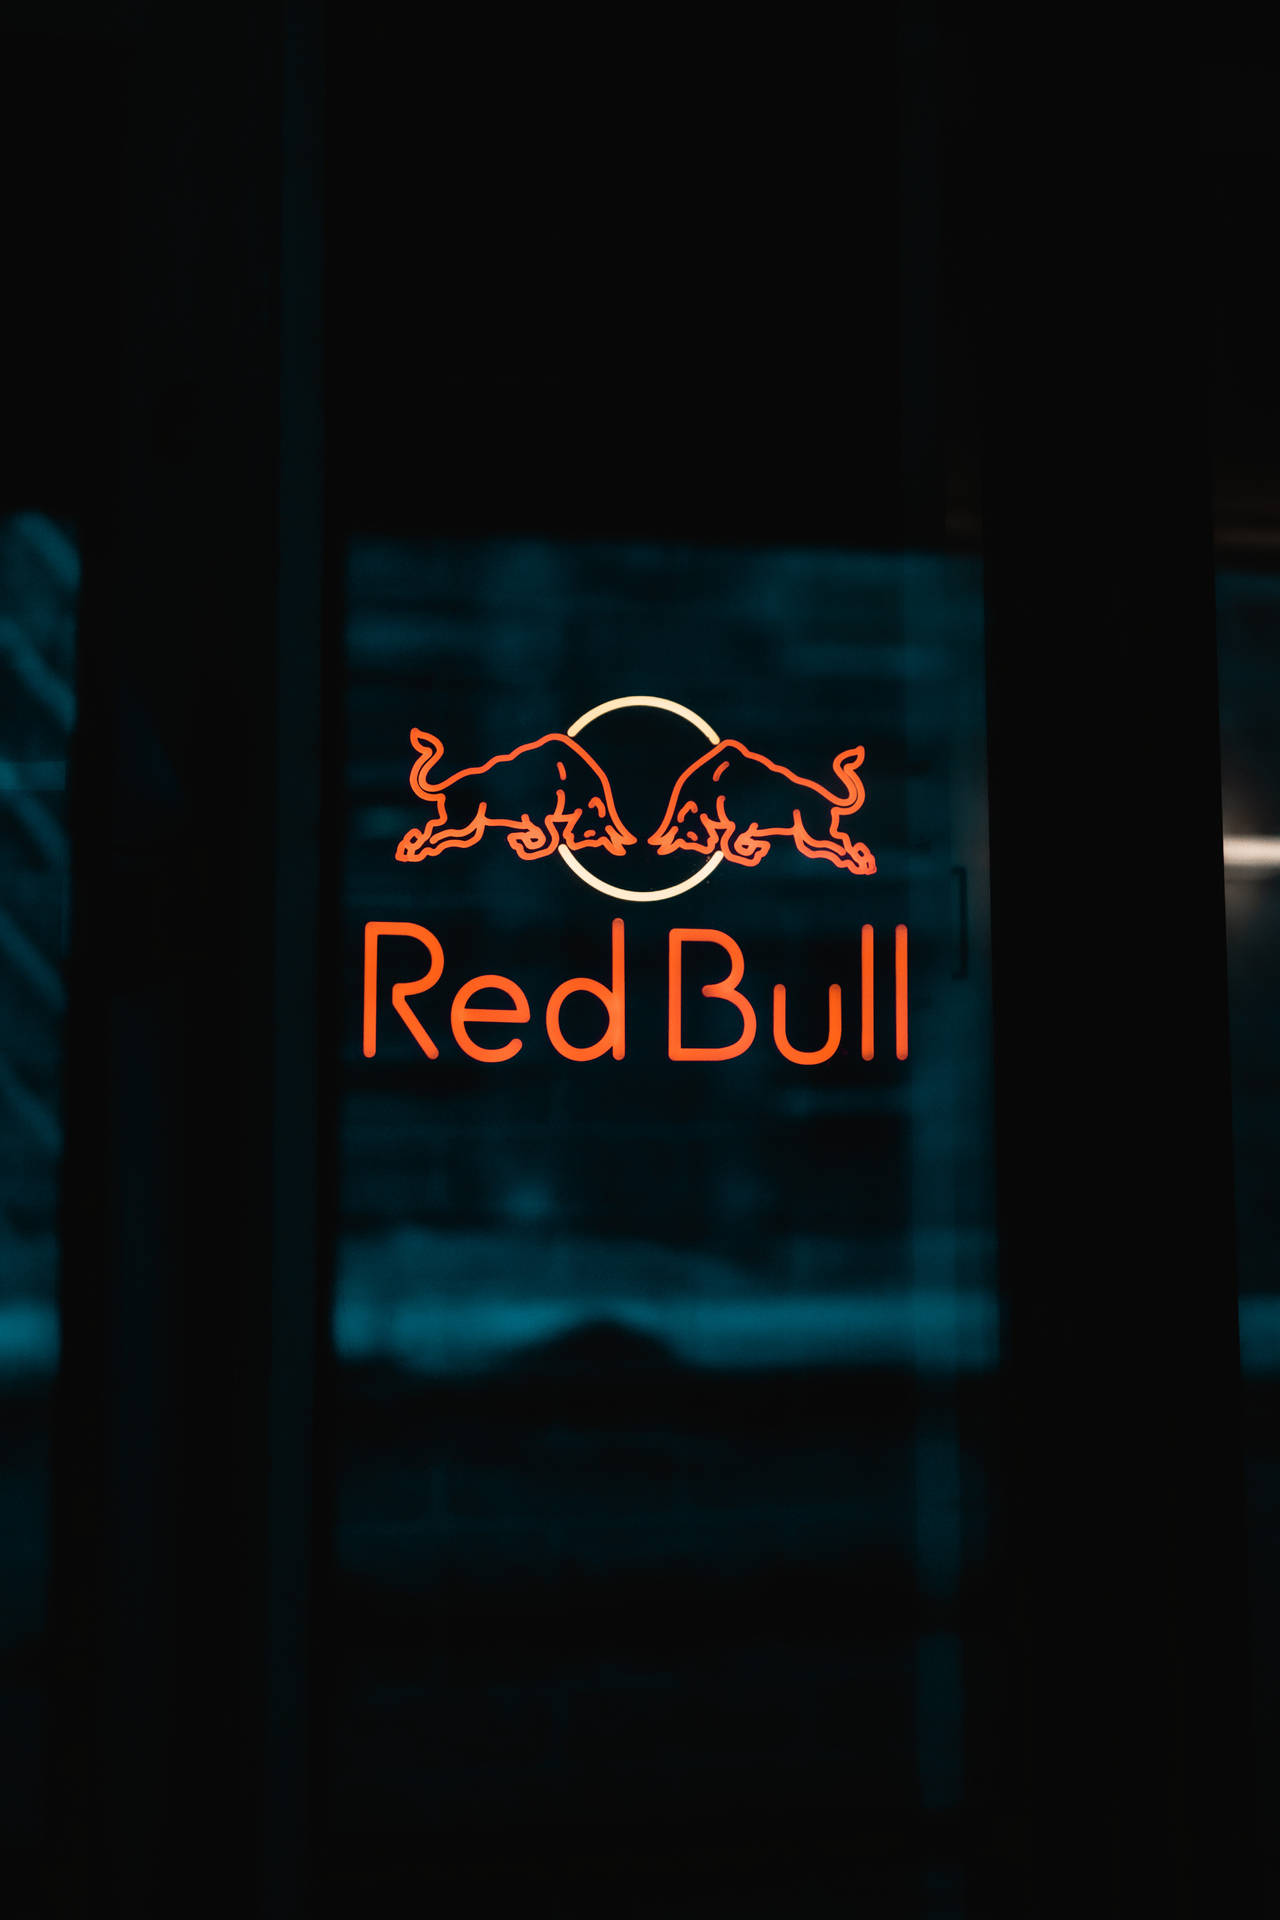 Red Bull 3374X5061 Wallpaper and Background Image